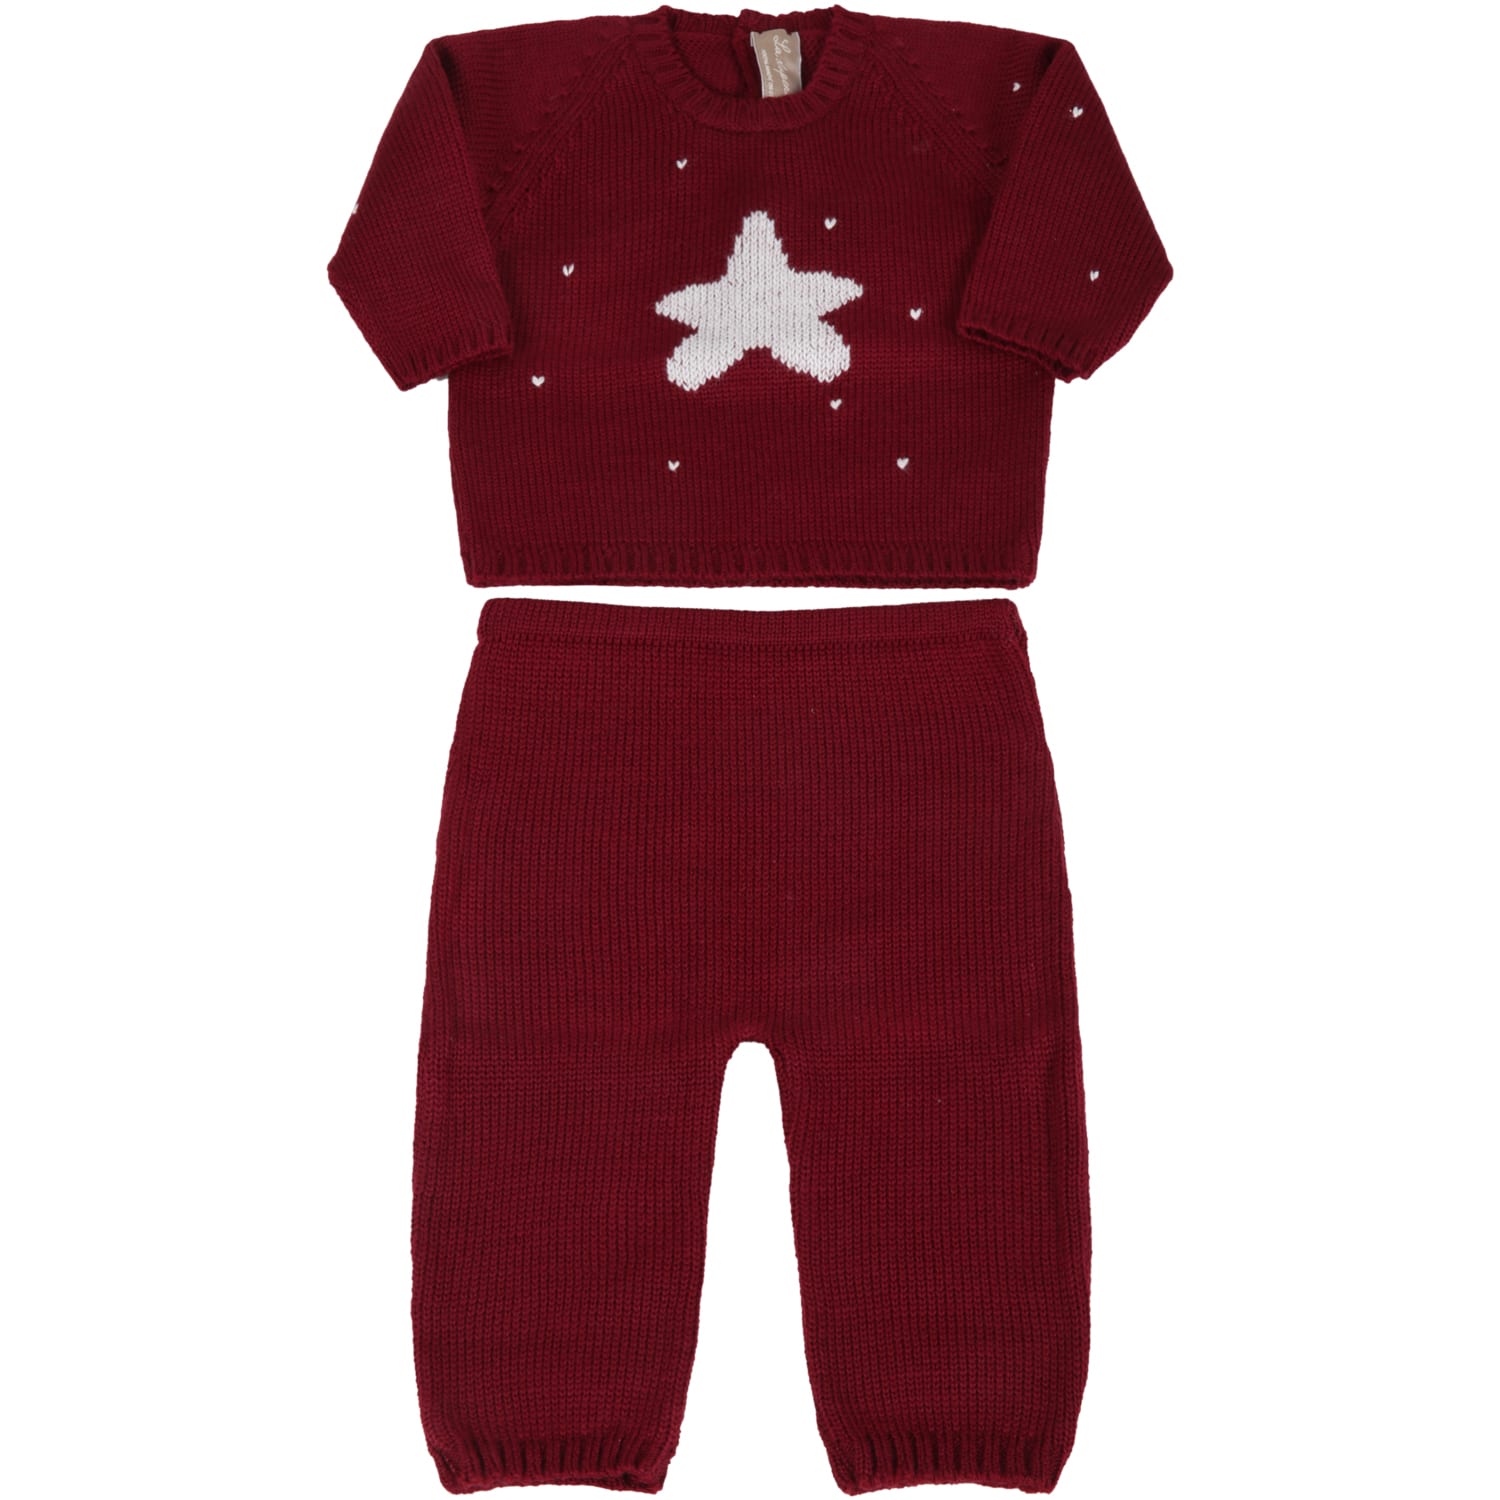 La stupenderia Bordeaux Suit For Baby Kids With Star